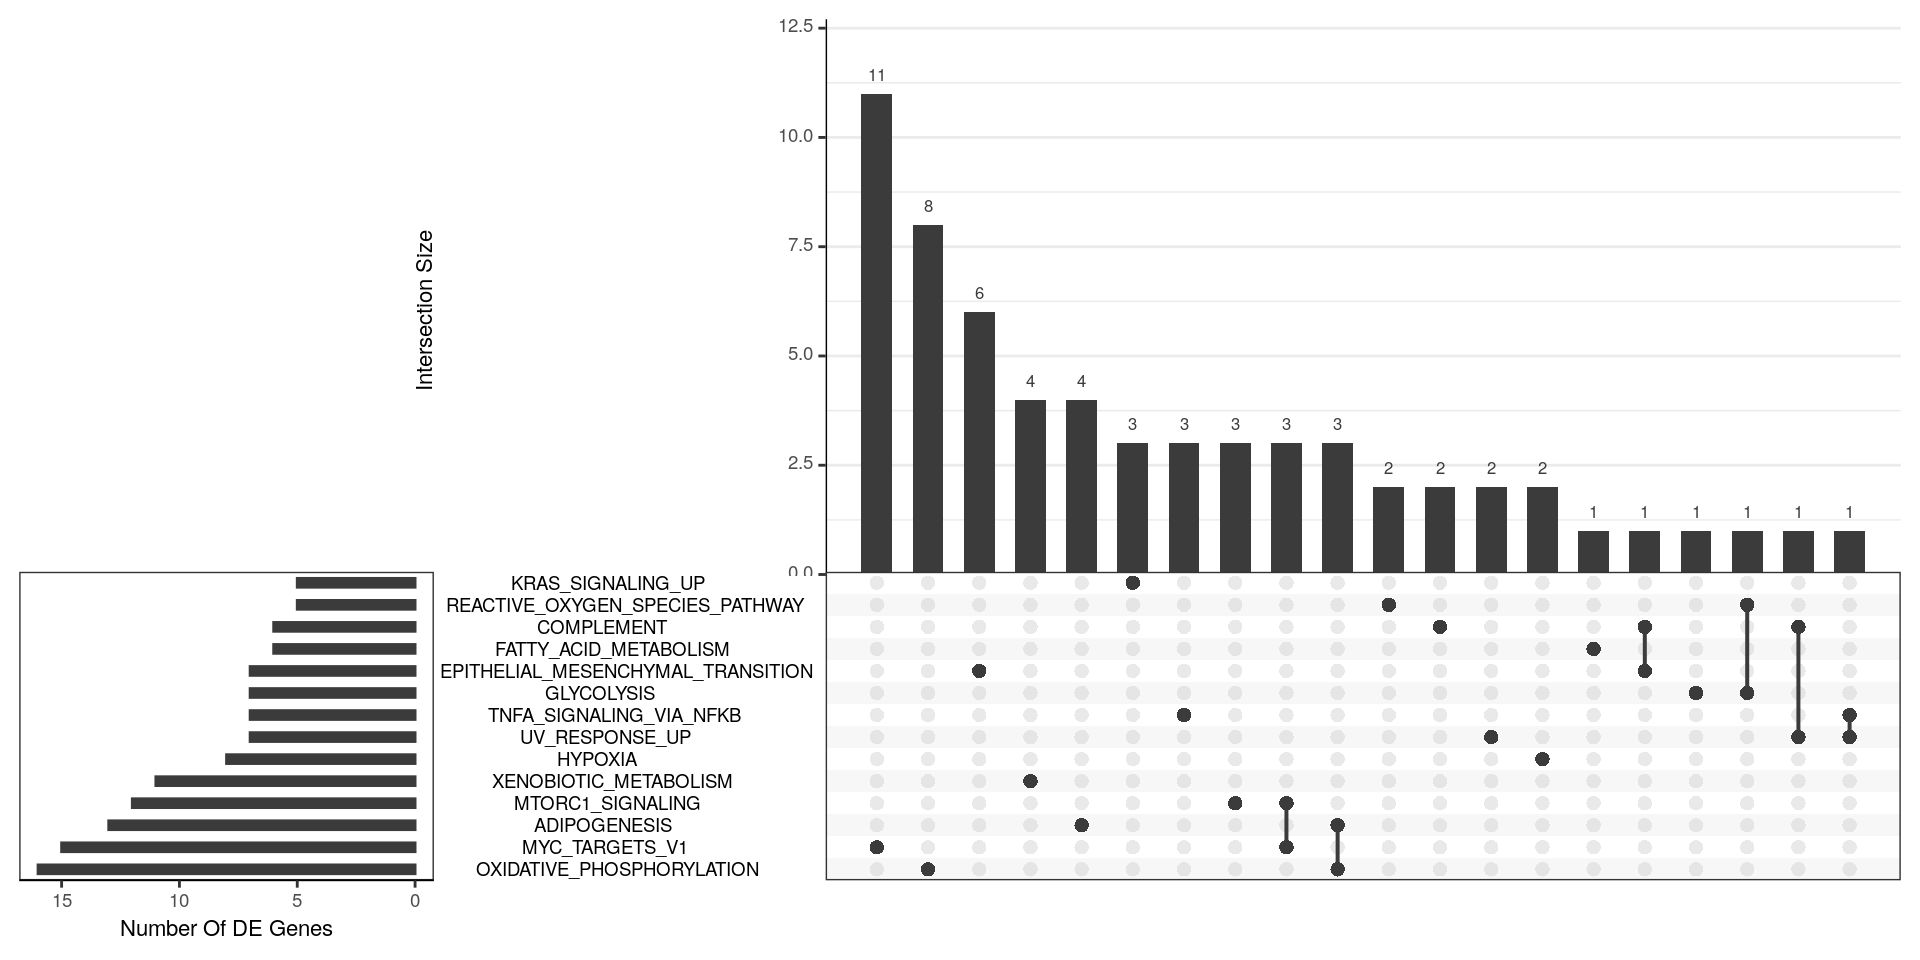 *UpSet plot indicating distribution of DE genes within all significant HALLMARK gene sets. Gene sets were restricted to those with an FDR < 0.05 and at least 5 DE genes. The plot is truncated at the right for simplicity. Most gene sets seem relatively independent of each other with regard to DE genes.*